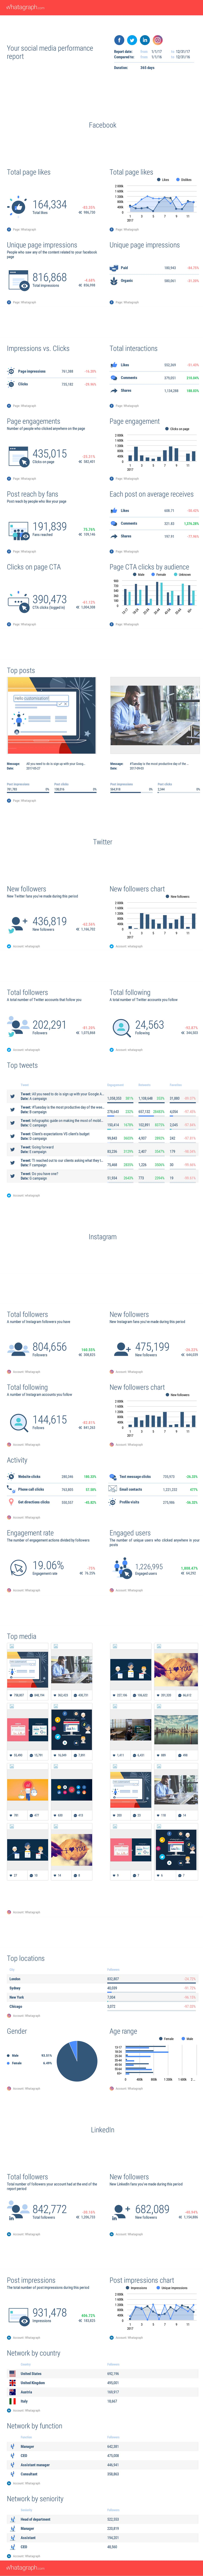 Screenshot of a Social Media Marketing Report, showing data from Facebook, Twitter, LinkedIn, and Instagram.